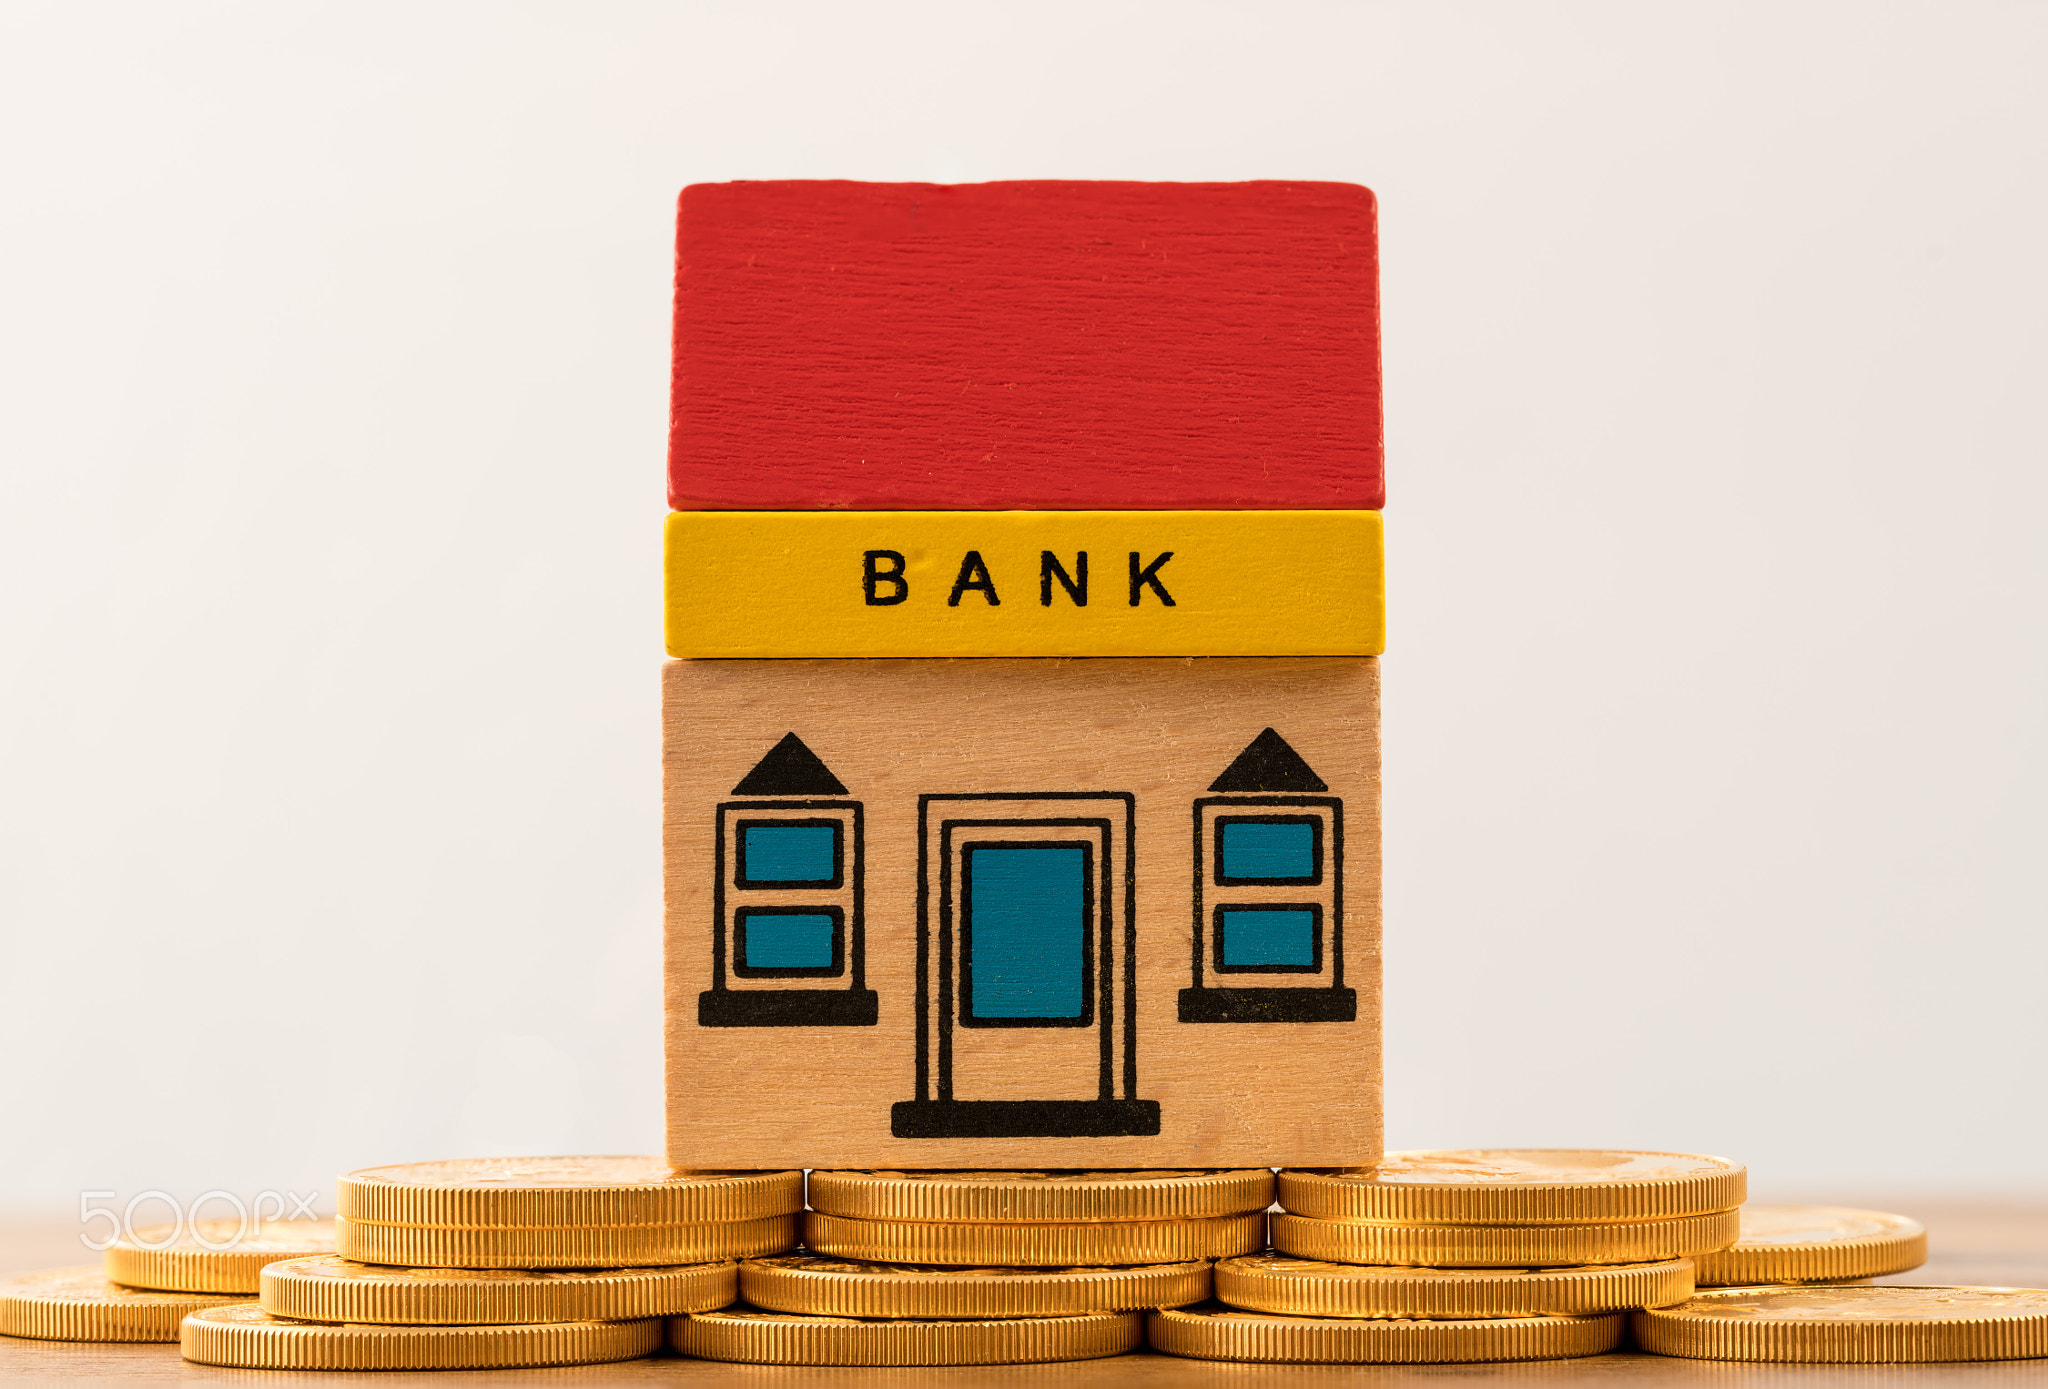 Toy bank building on gold coin assets